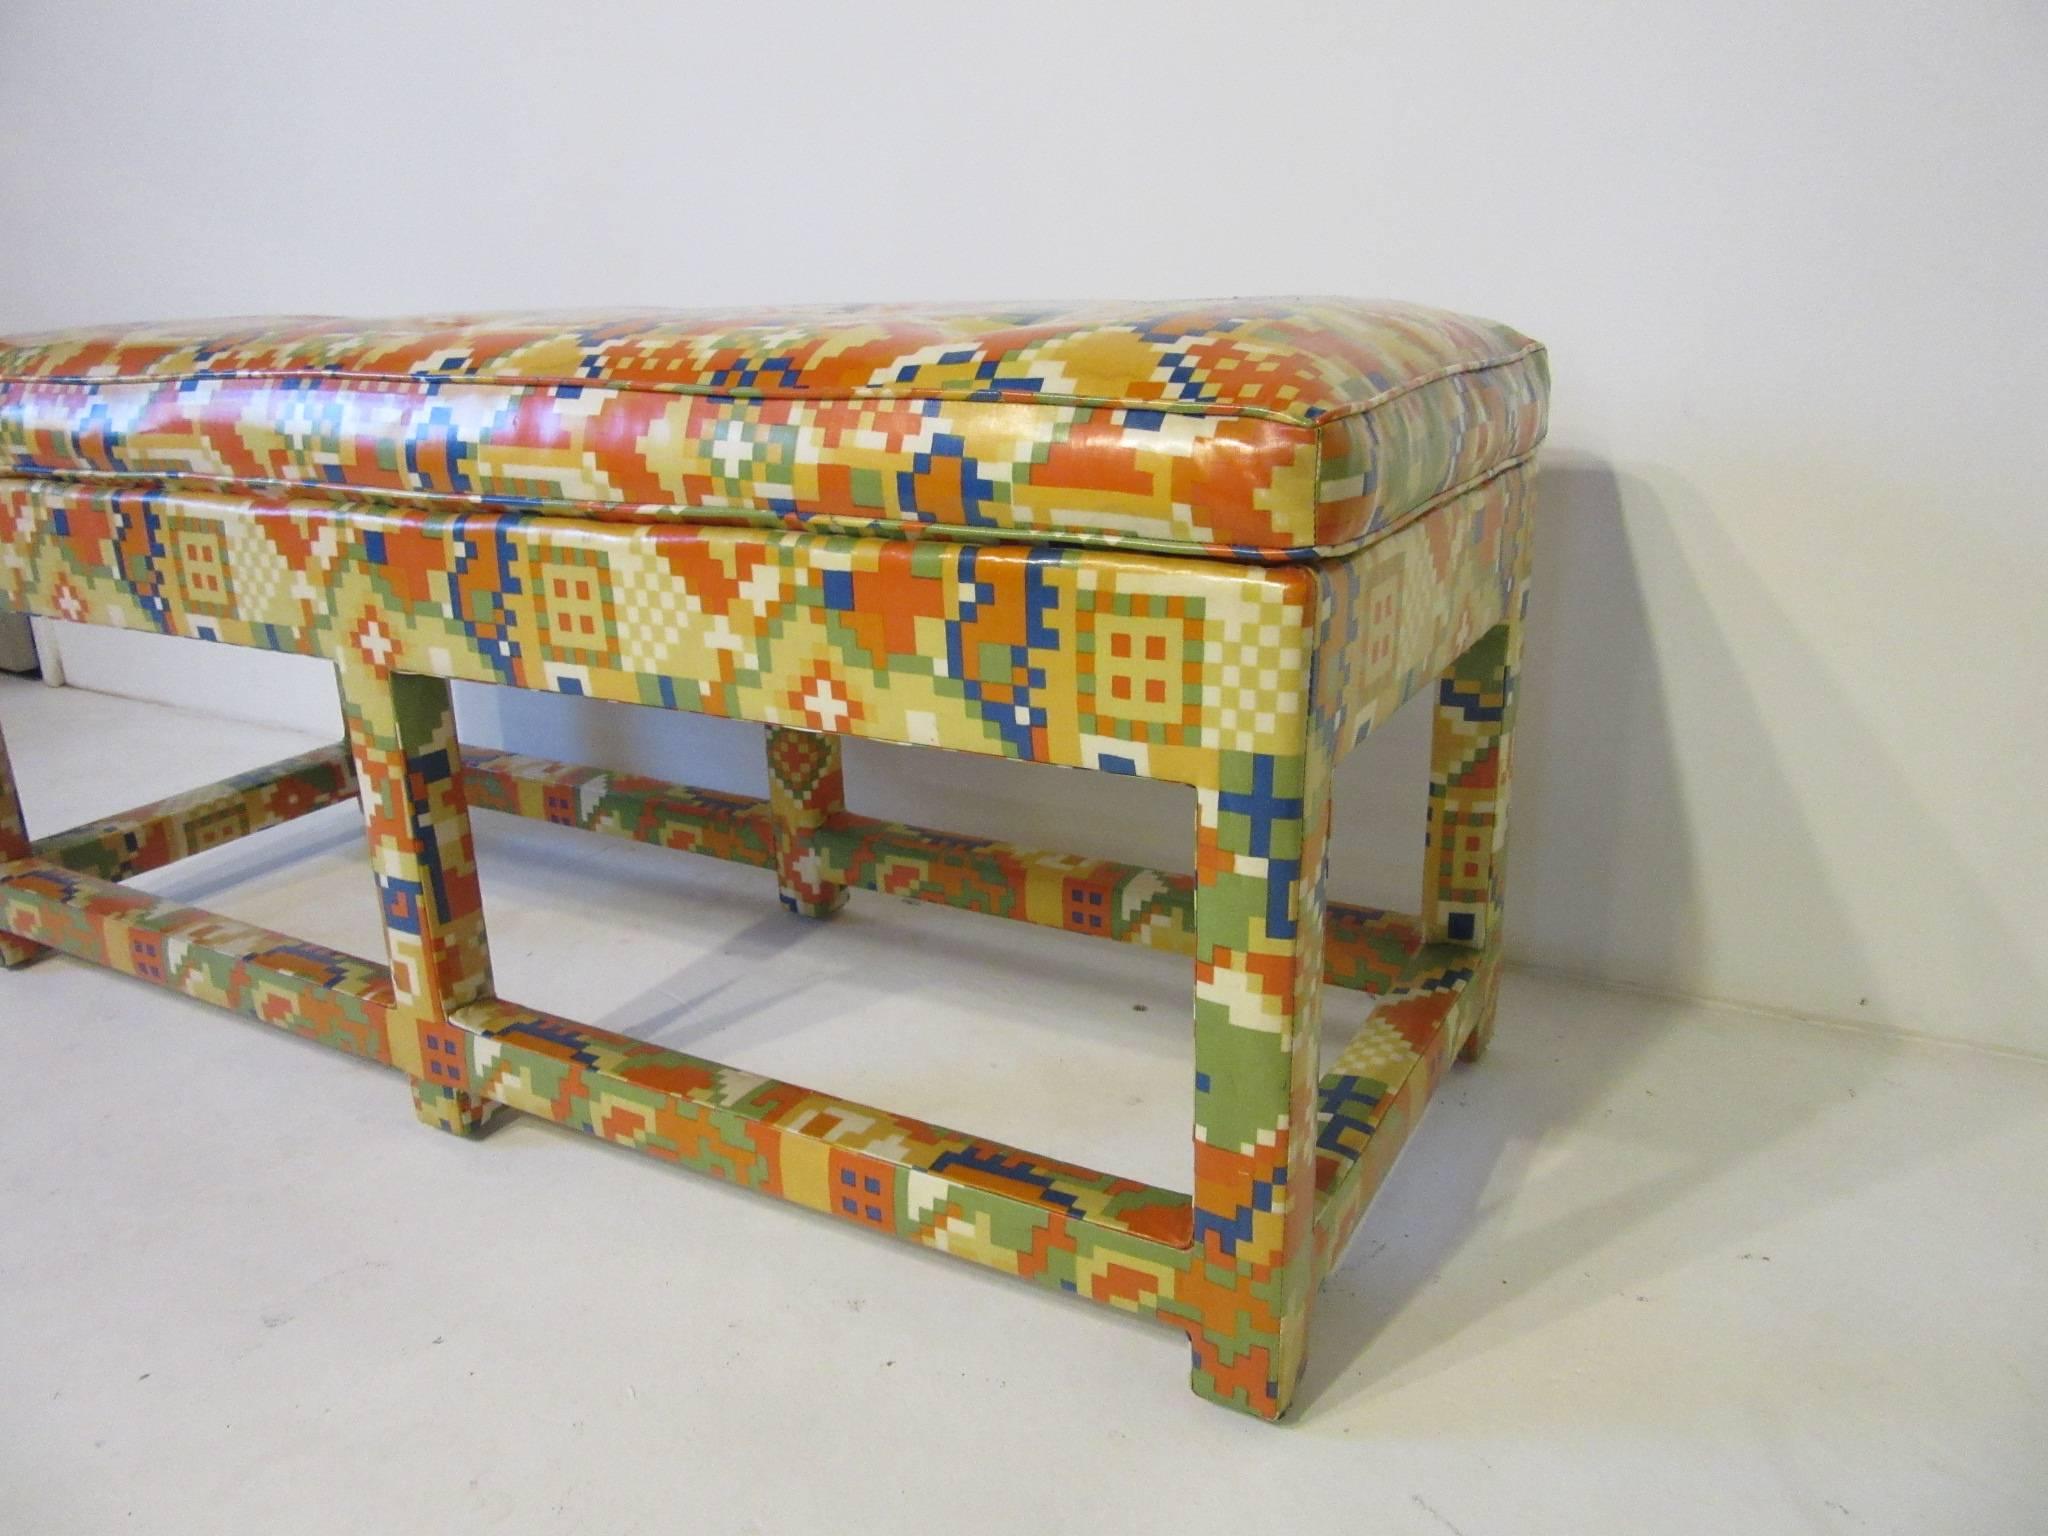 An upholstered bench with colorful, 1980s patterns in oil cloth with lower stretchers, from the period, well-crafted and perfect for that dash of color. Designed in the style of Karl Springer and Steve Chase.